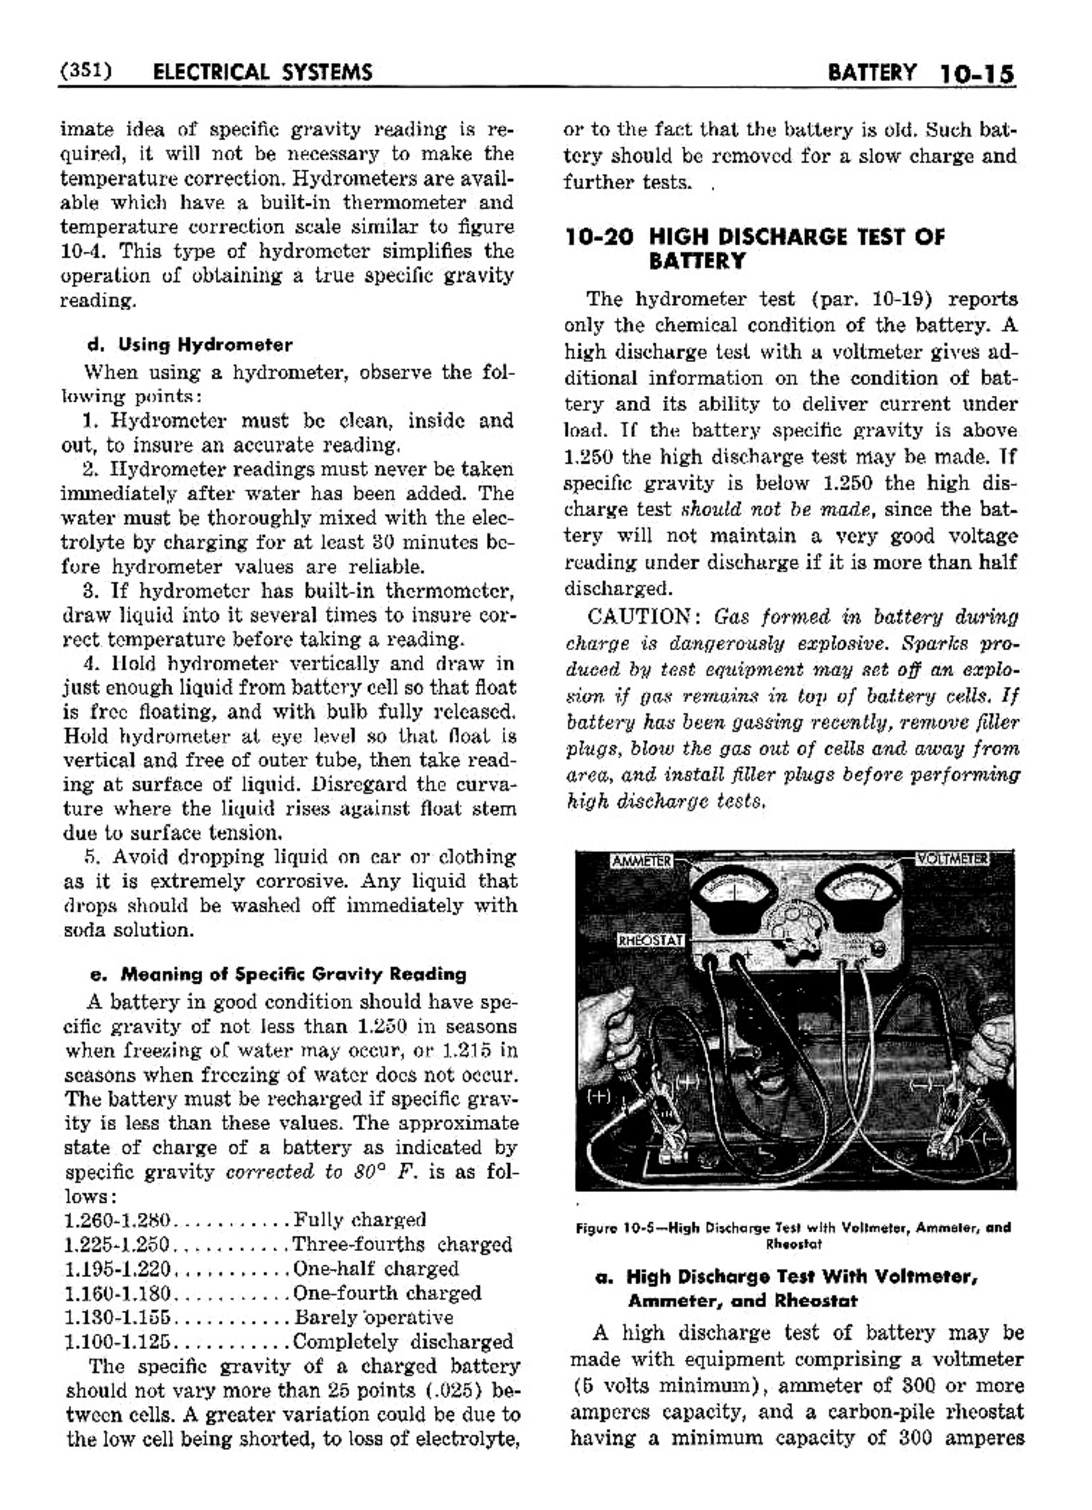 n_11 1952 Buick Shop Manual - Electrical Systems-015-015.jpg